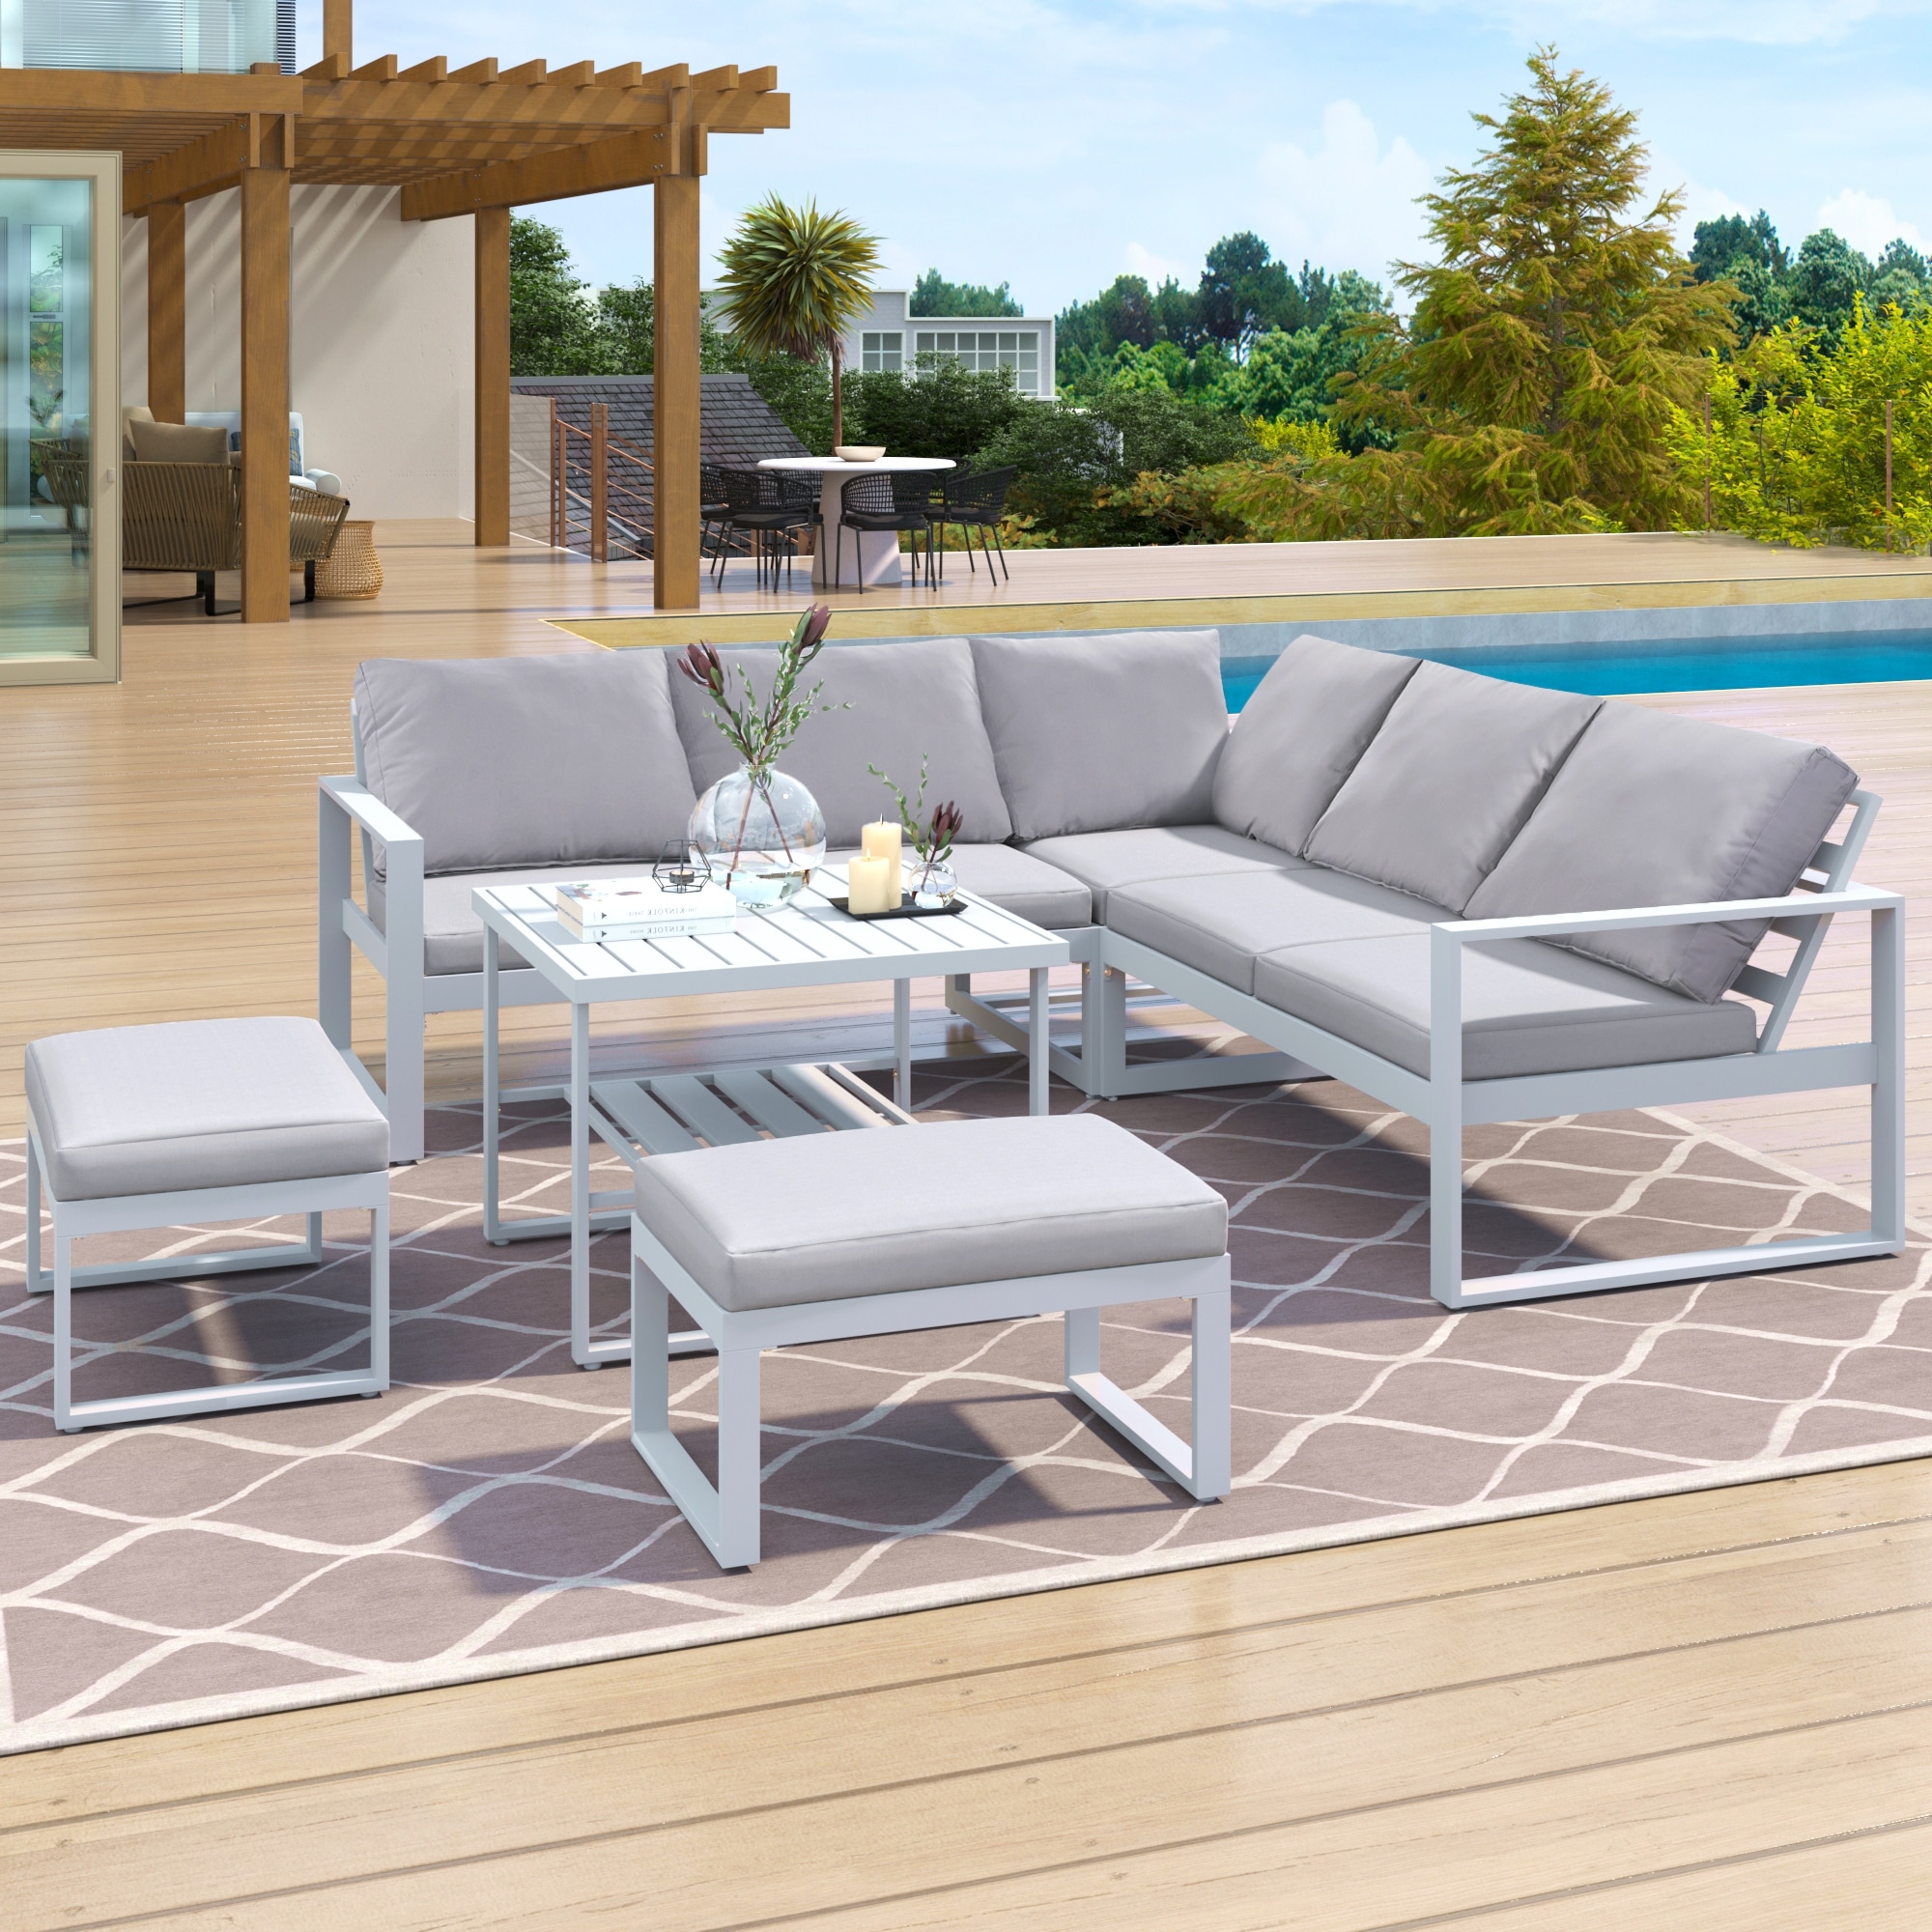 Outdoor Sofa Combination Set With 2 Love Sofa And 1 Single Sofa and 1 Table  2 Bench